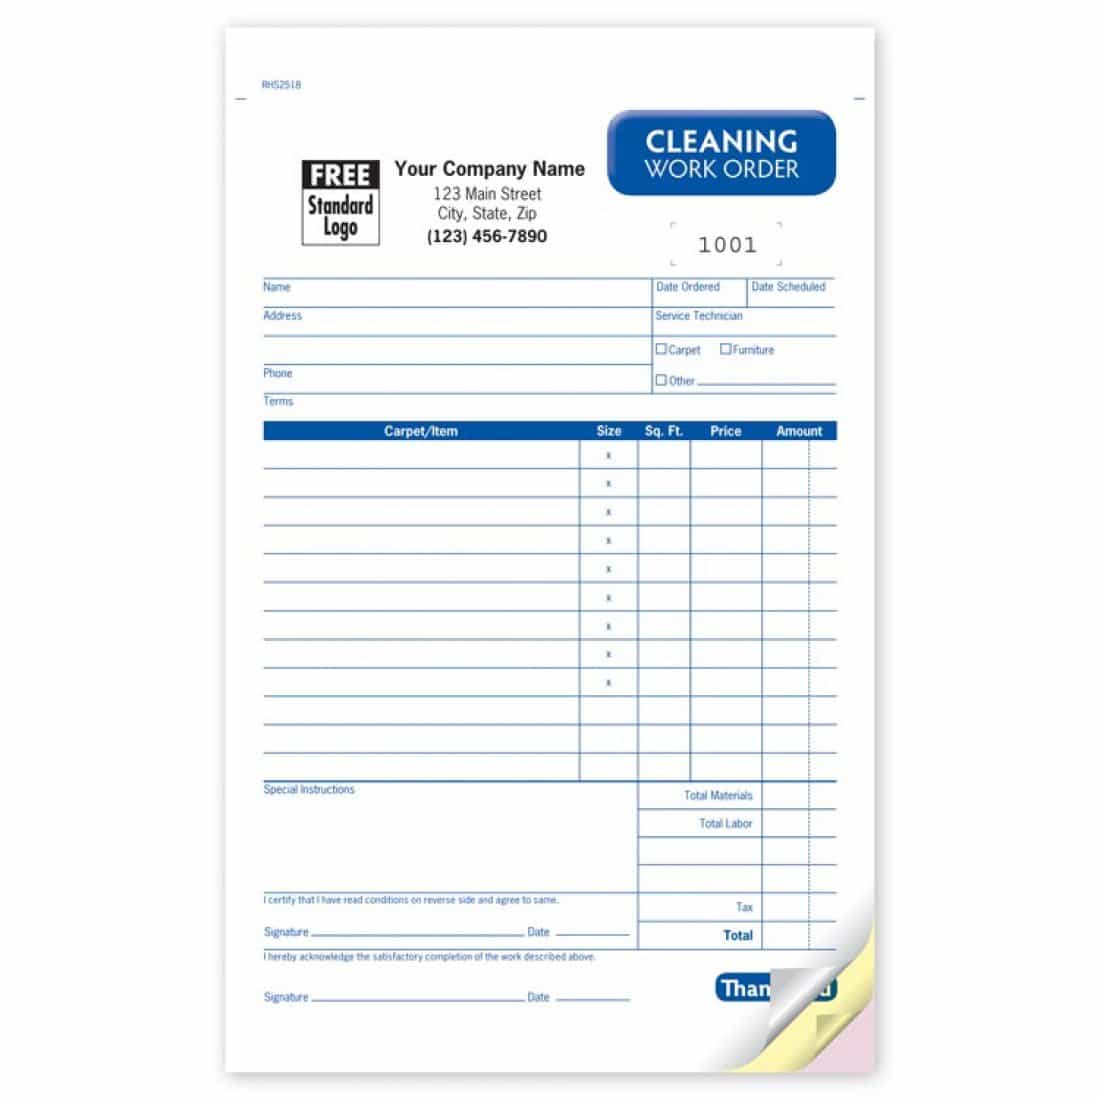 Professional Carpet Cleaning Receipt And Cleaning Business Contract Forms